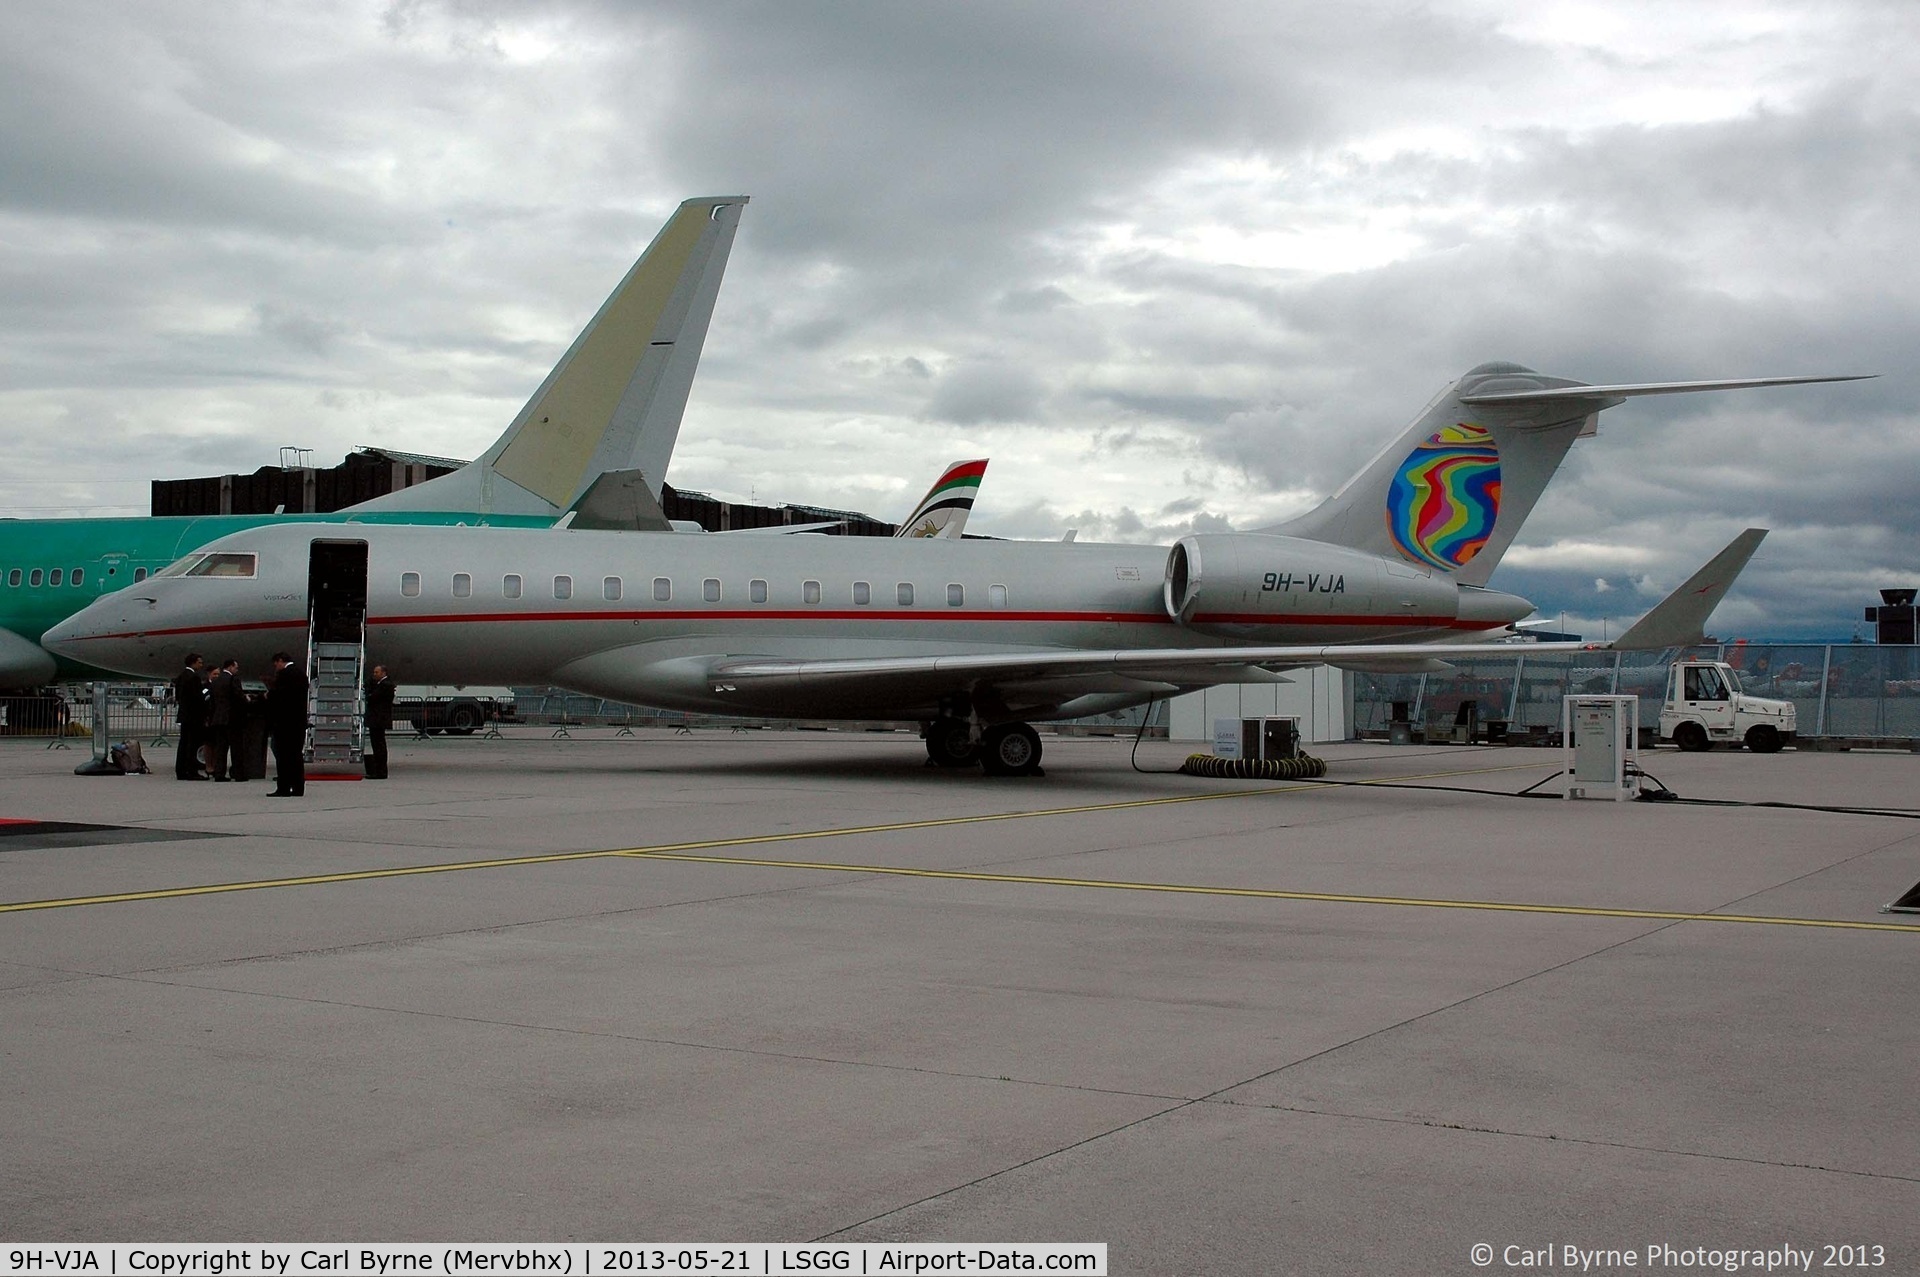 9H-VJA, 2011 Bombardier BD-700-1A10 Global Express XRS C/N 9441, Part of the EBACE 2013 Static Display